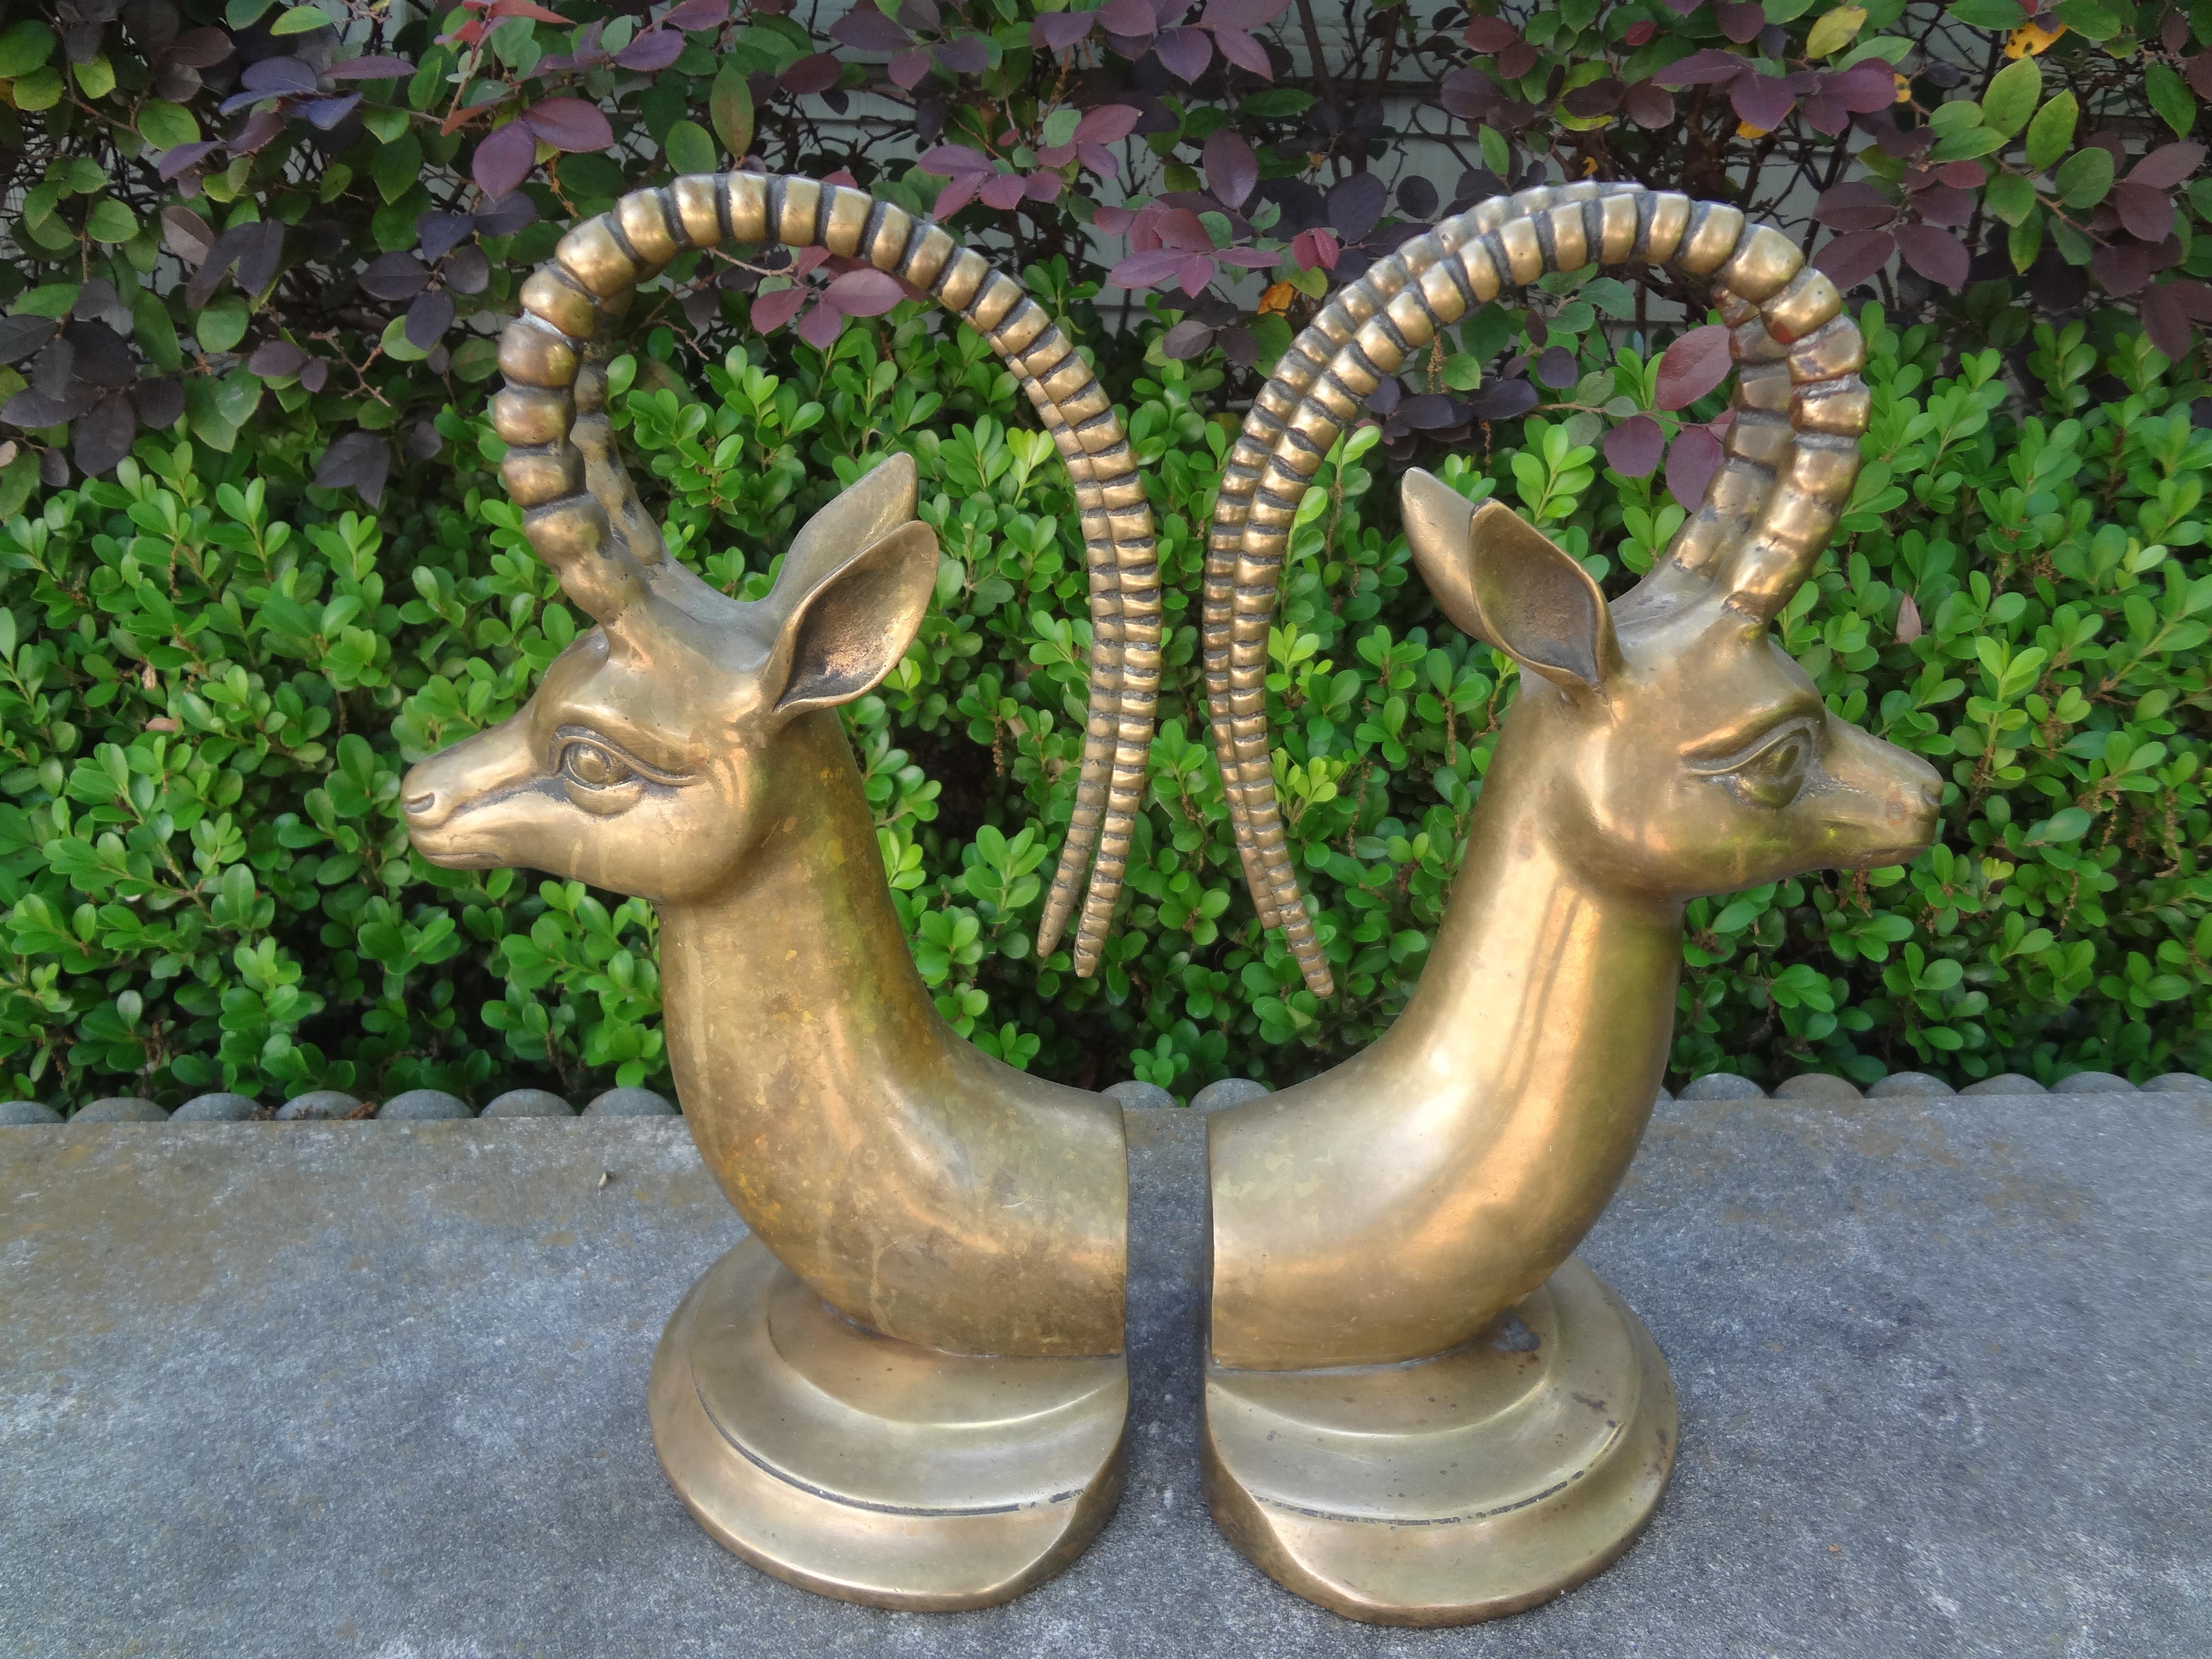 Pair Of Vintage Brass Ibex Bookends.
Our large pair of Hollywood Regency brass ibex bookends are substantial and can hold large scale or heavy books. Beautiful desk accessory, coffee table accessory or bookcase accessory. Great patina!